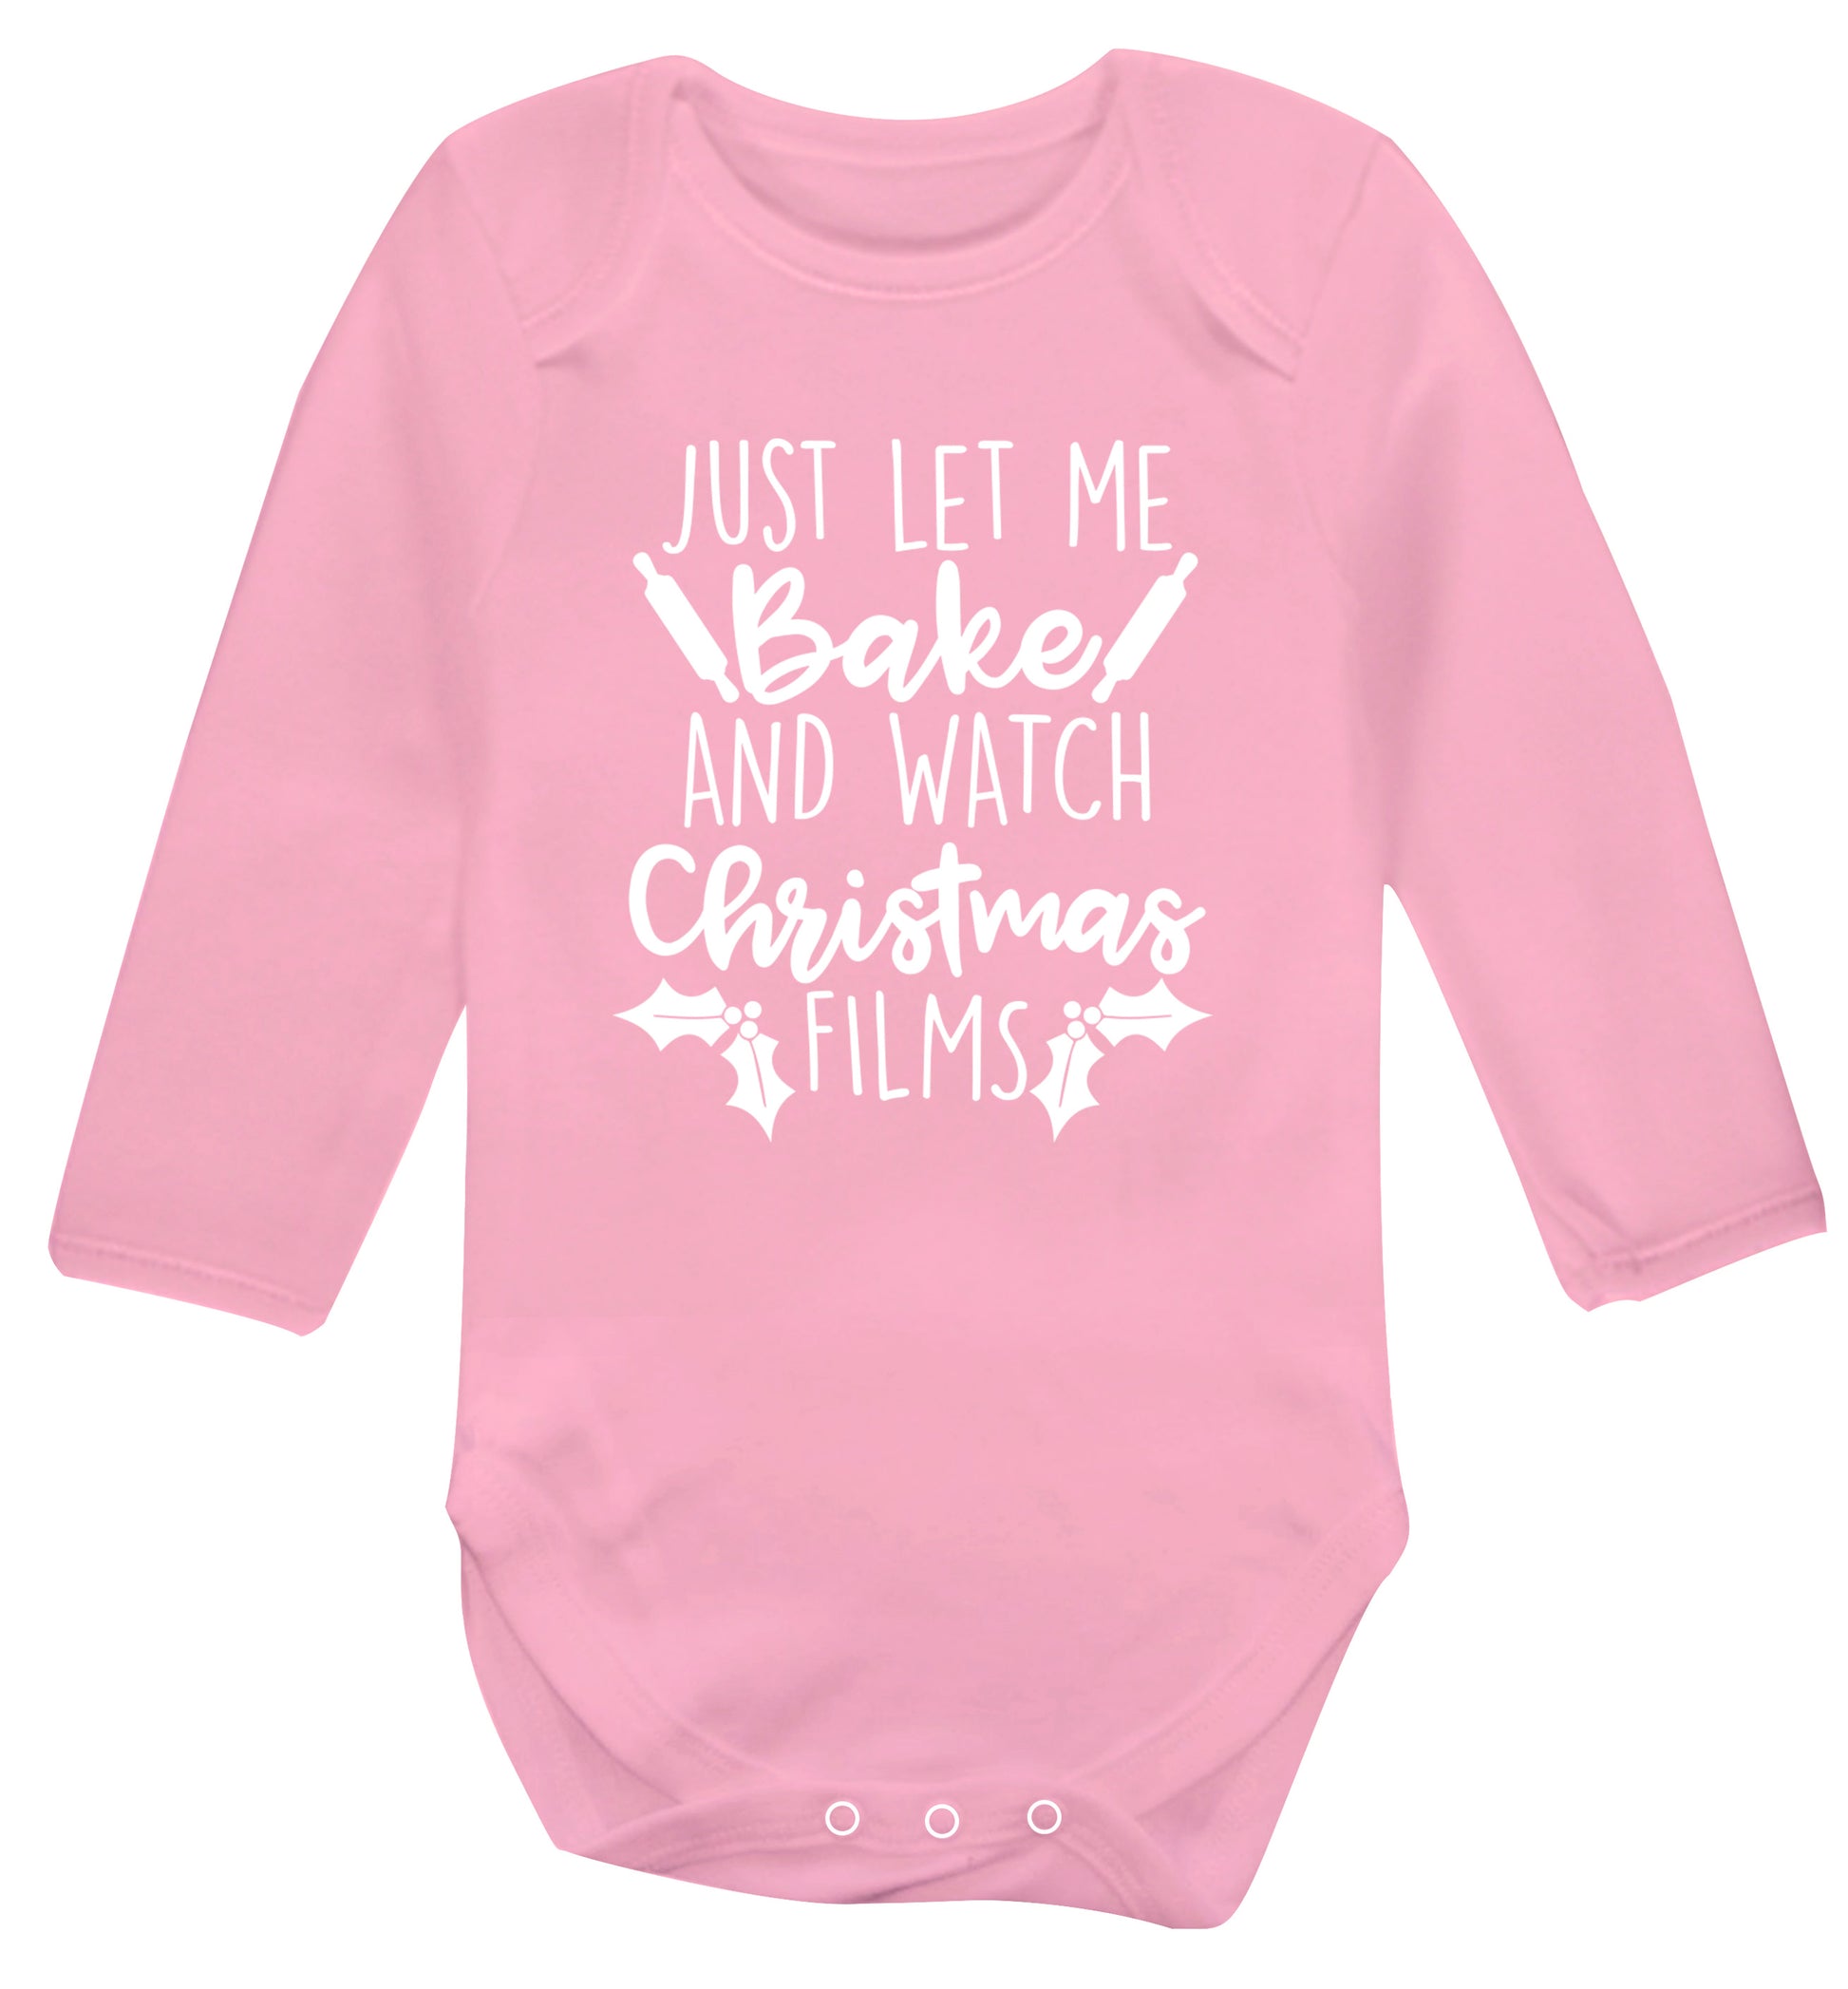 Just let me bake and watch Christmas films Baby Vest long sleeved pale pink 6-12 months